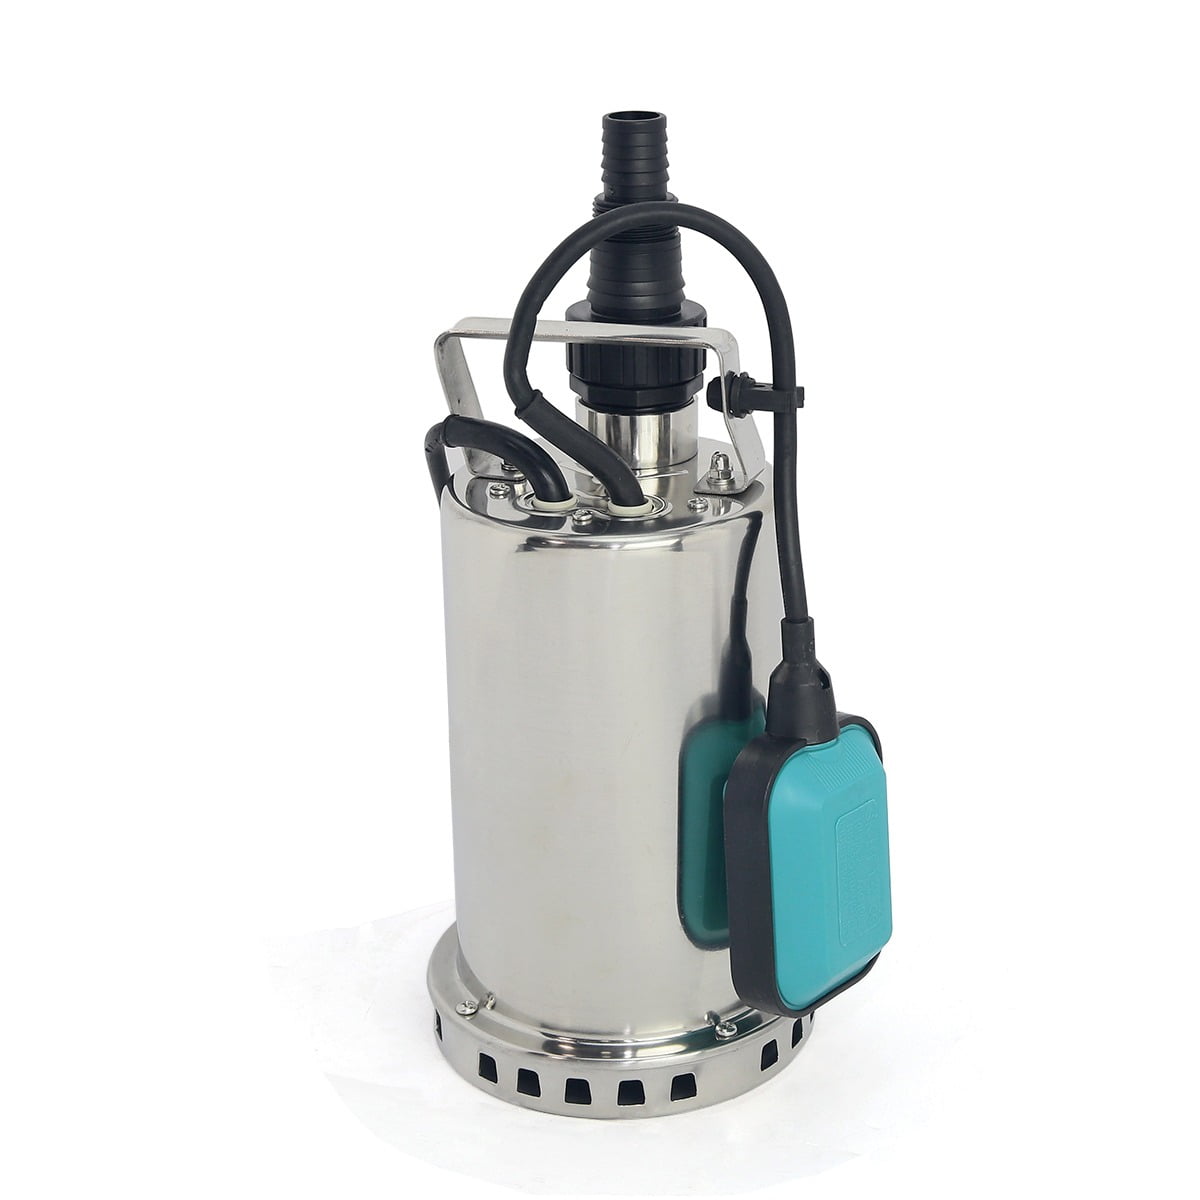 Details about   1HP Electric Submersible Water Pump Sump with Float Switch Portable B t s a c 50 